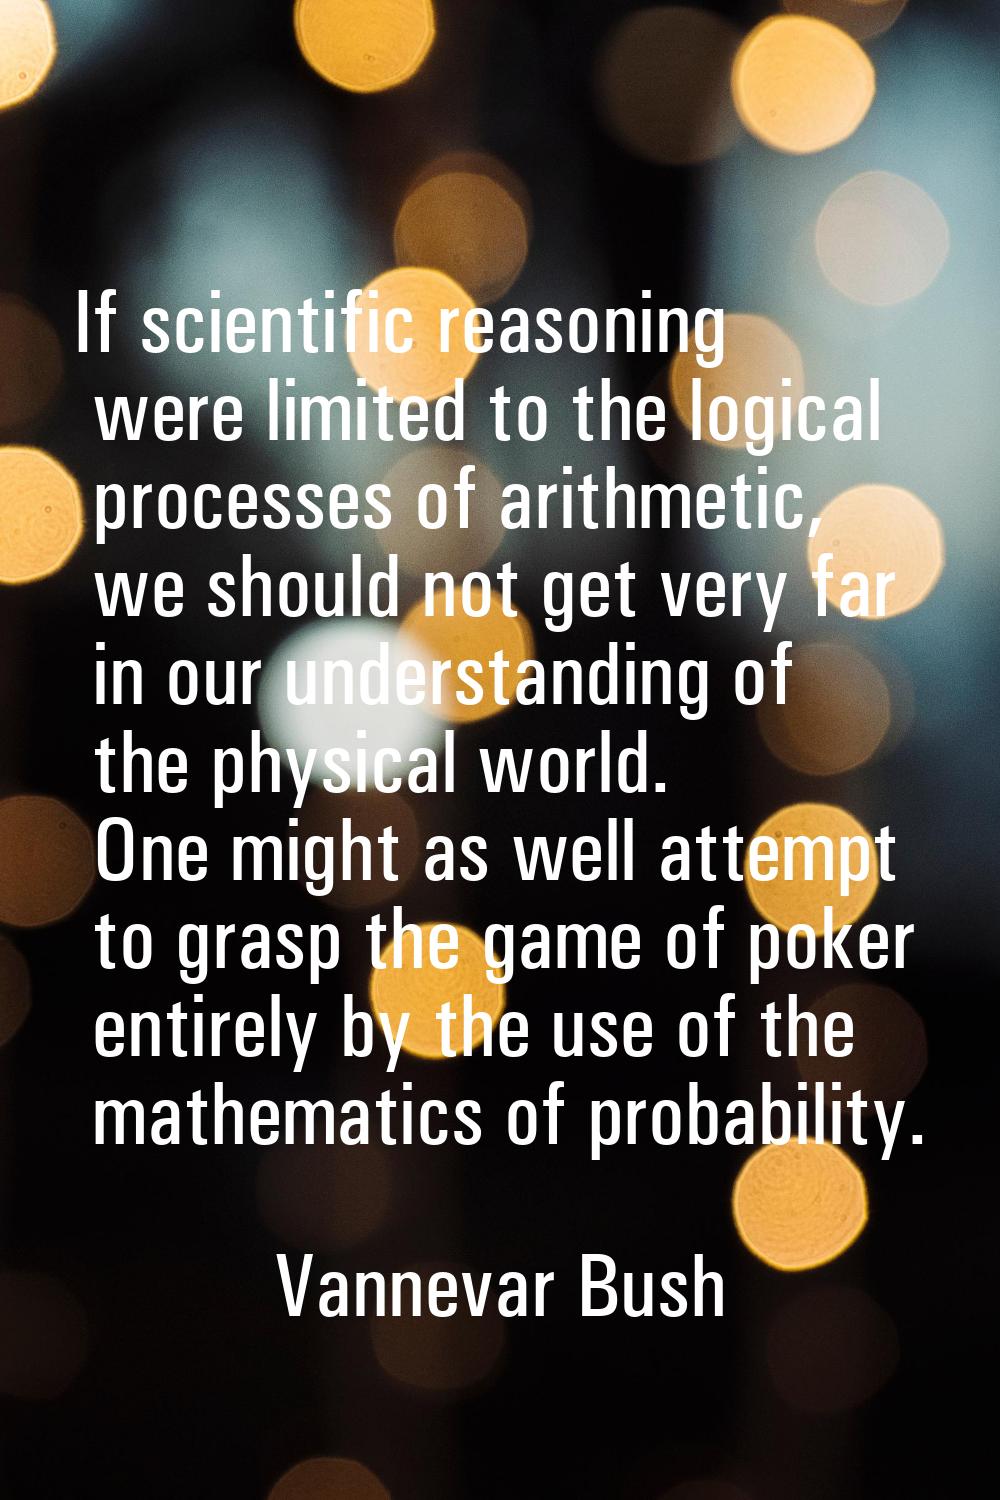 If scientific reasoning were limited to the logical processes of arithmetic, we should not get very